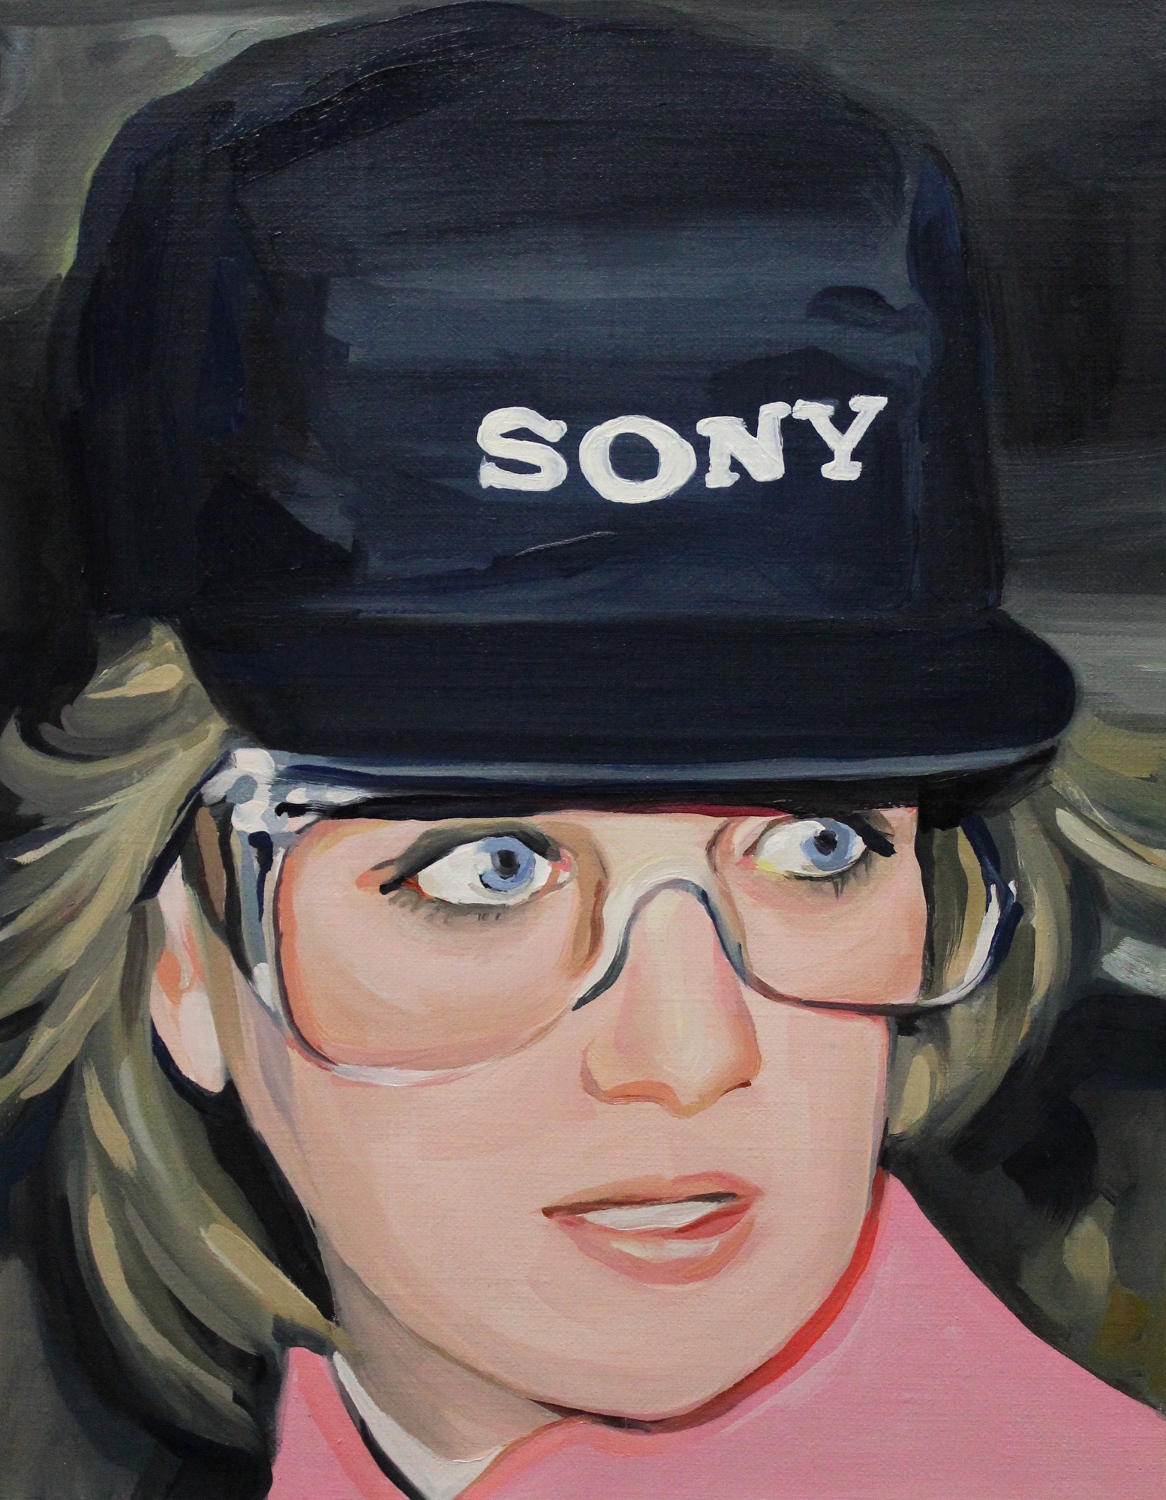 Laura Collins - Princess Diana Wearing Safety Glasses and a Sony Hat